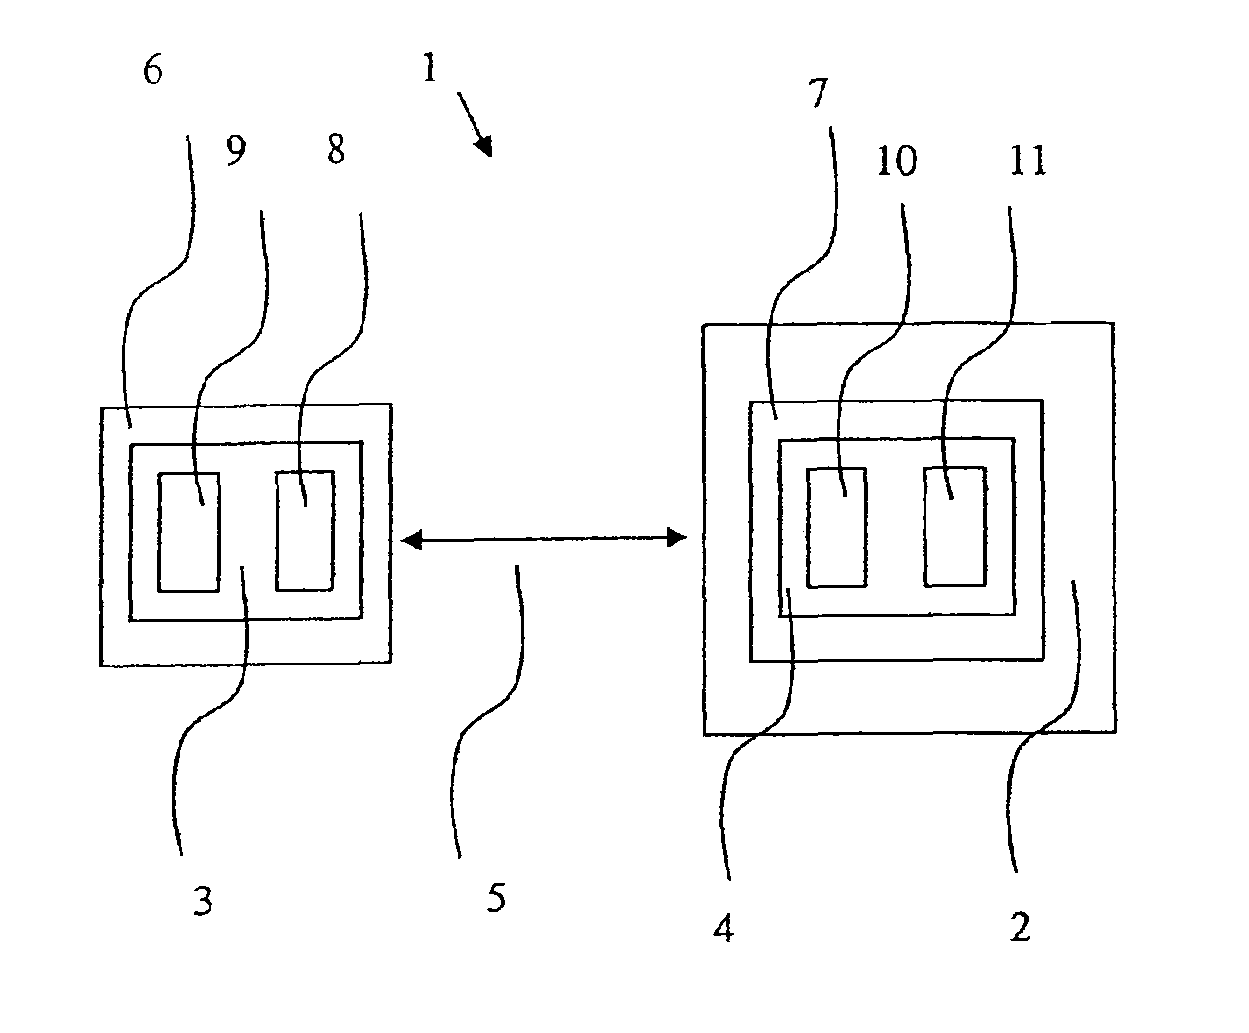 Licensing system and process for transferring license information